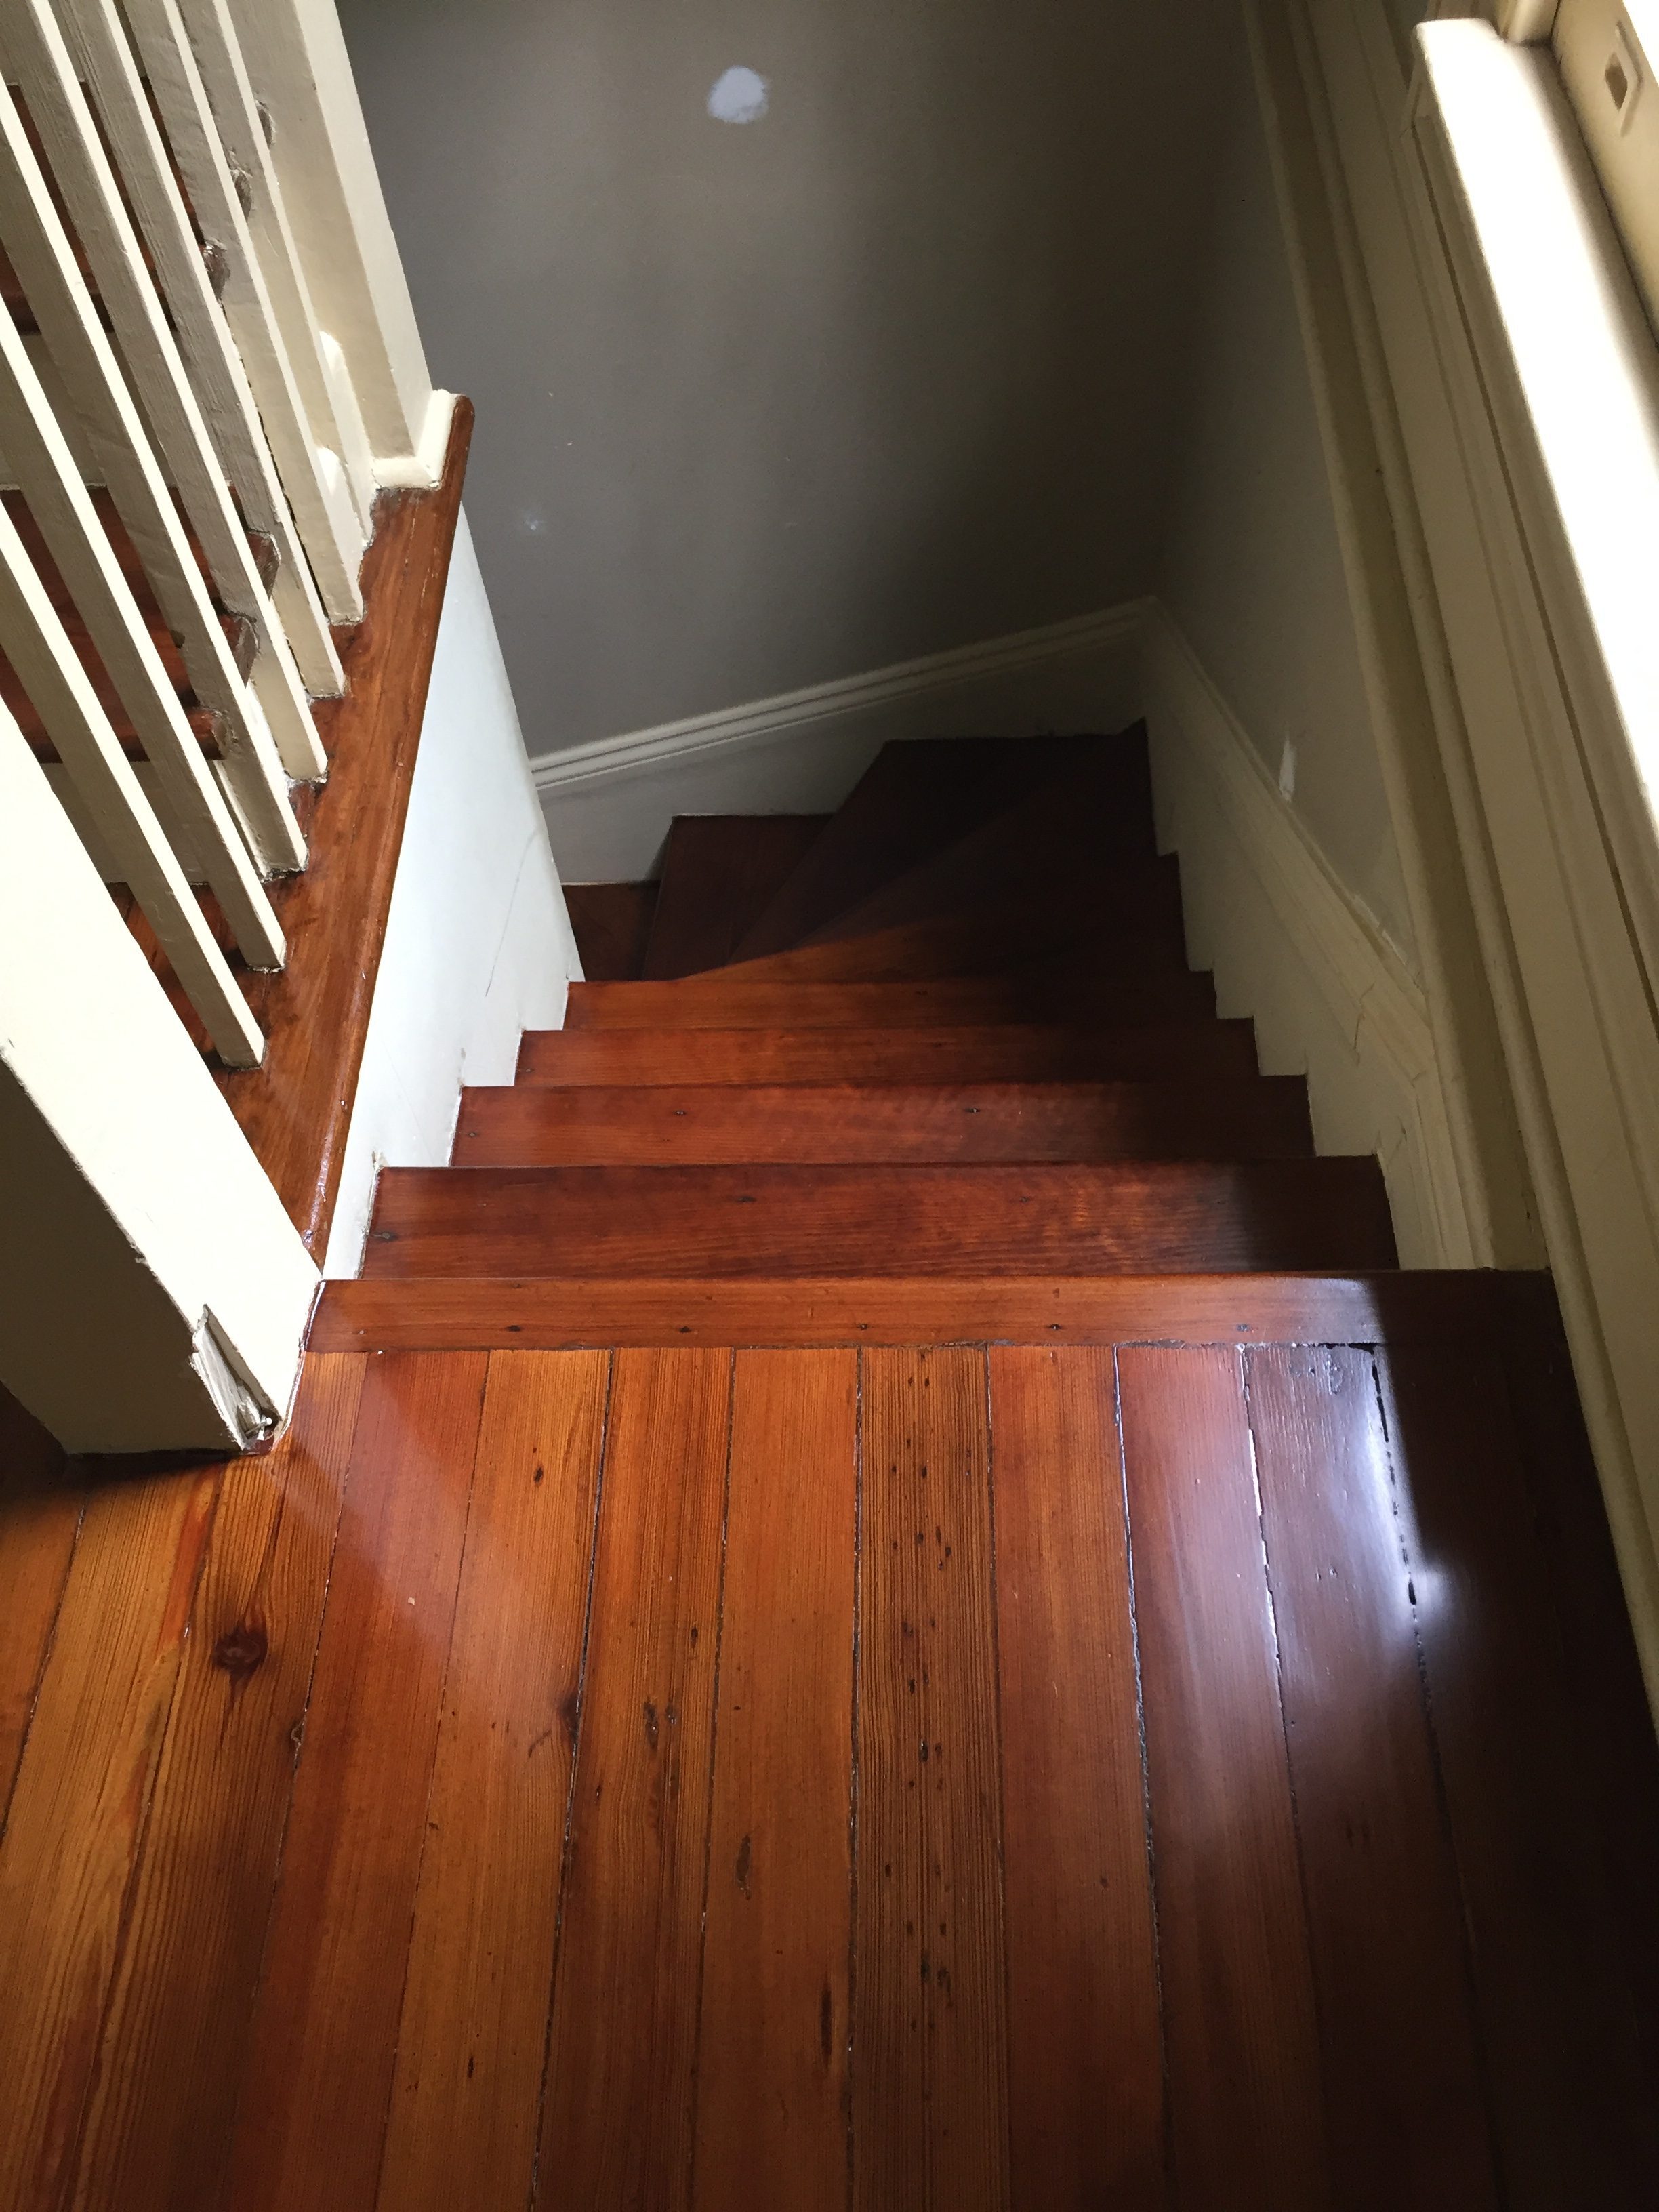 This is a staircase of refinished hardwood pine floors.